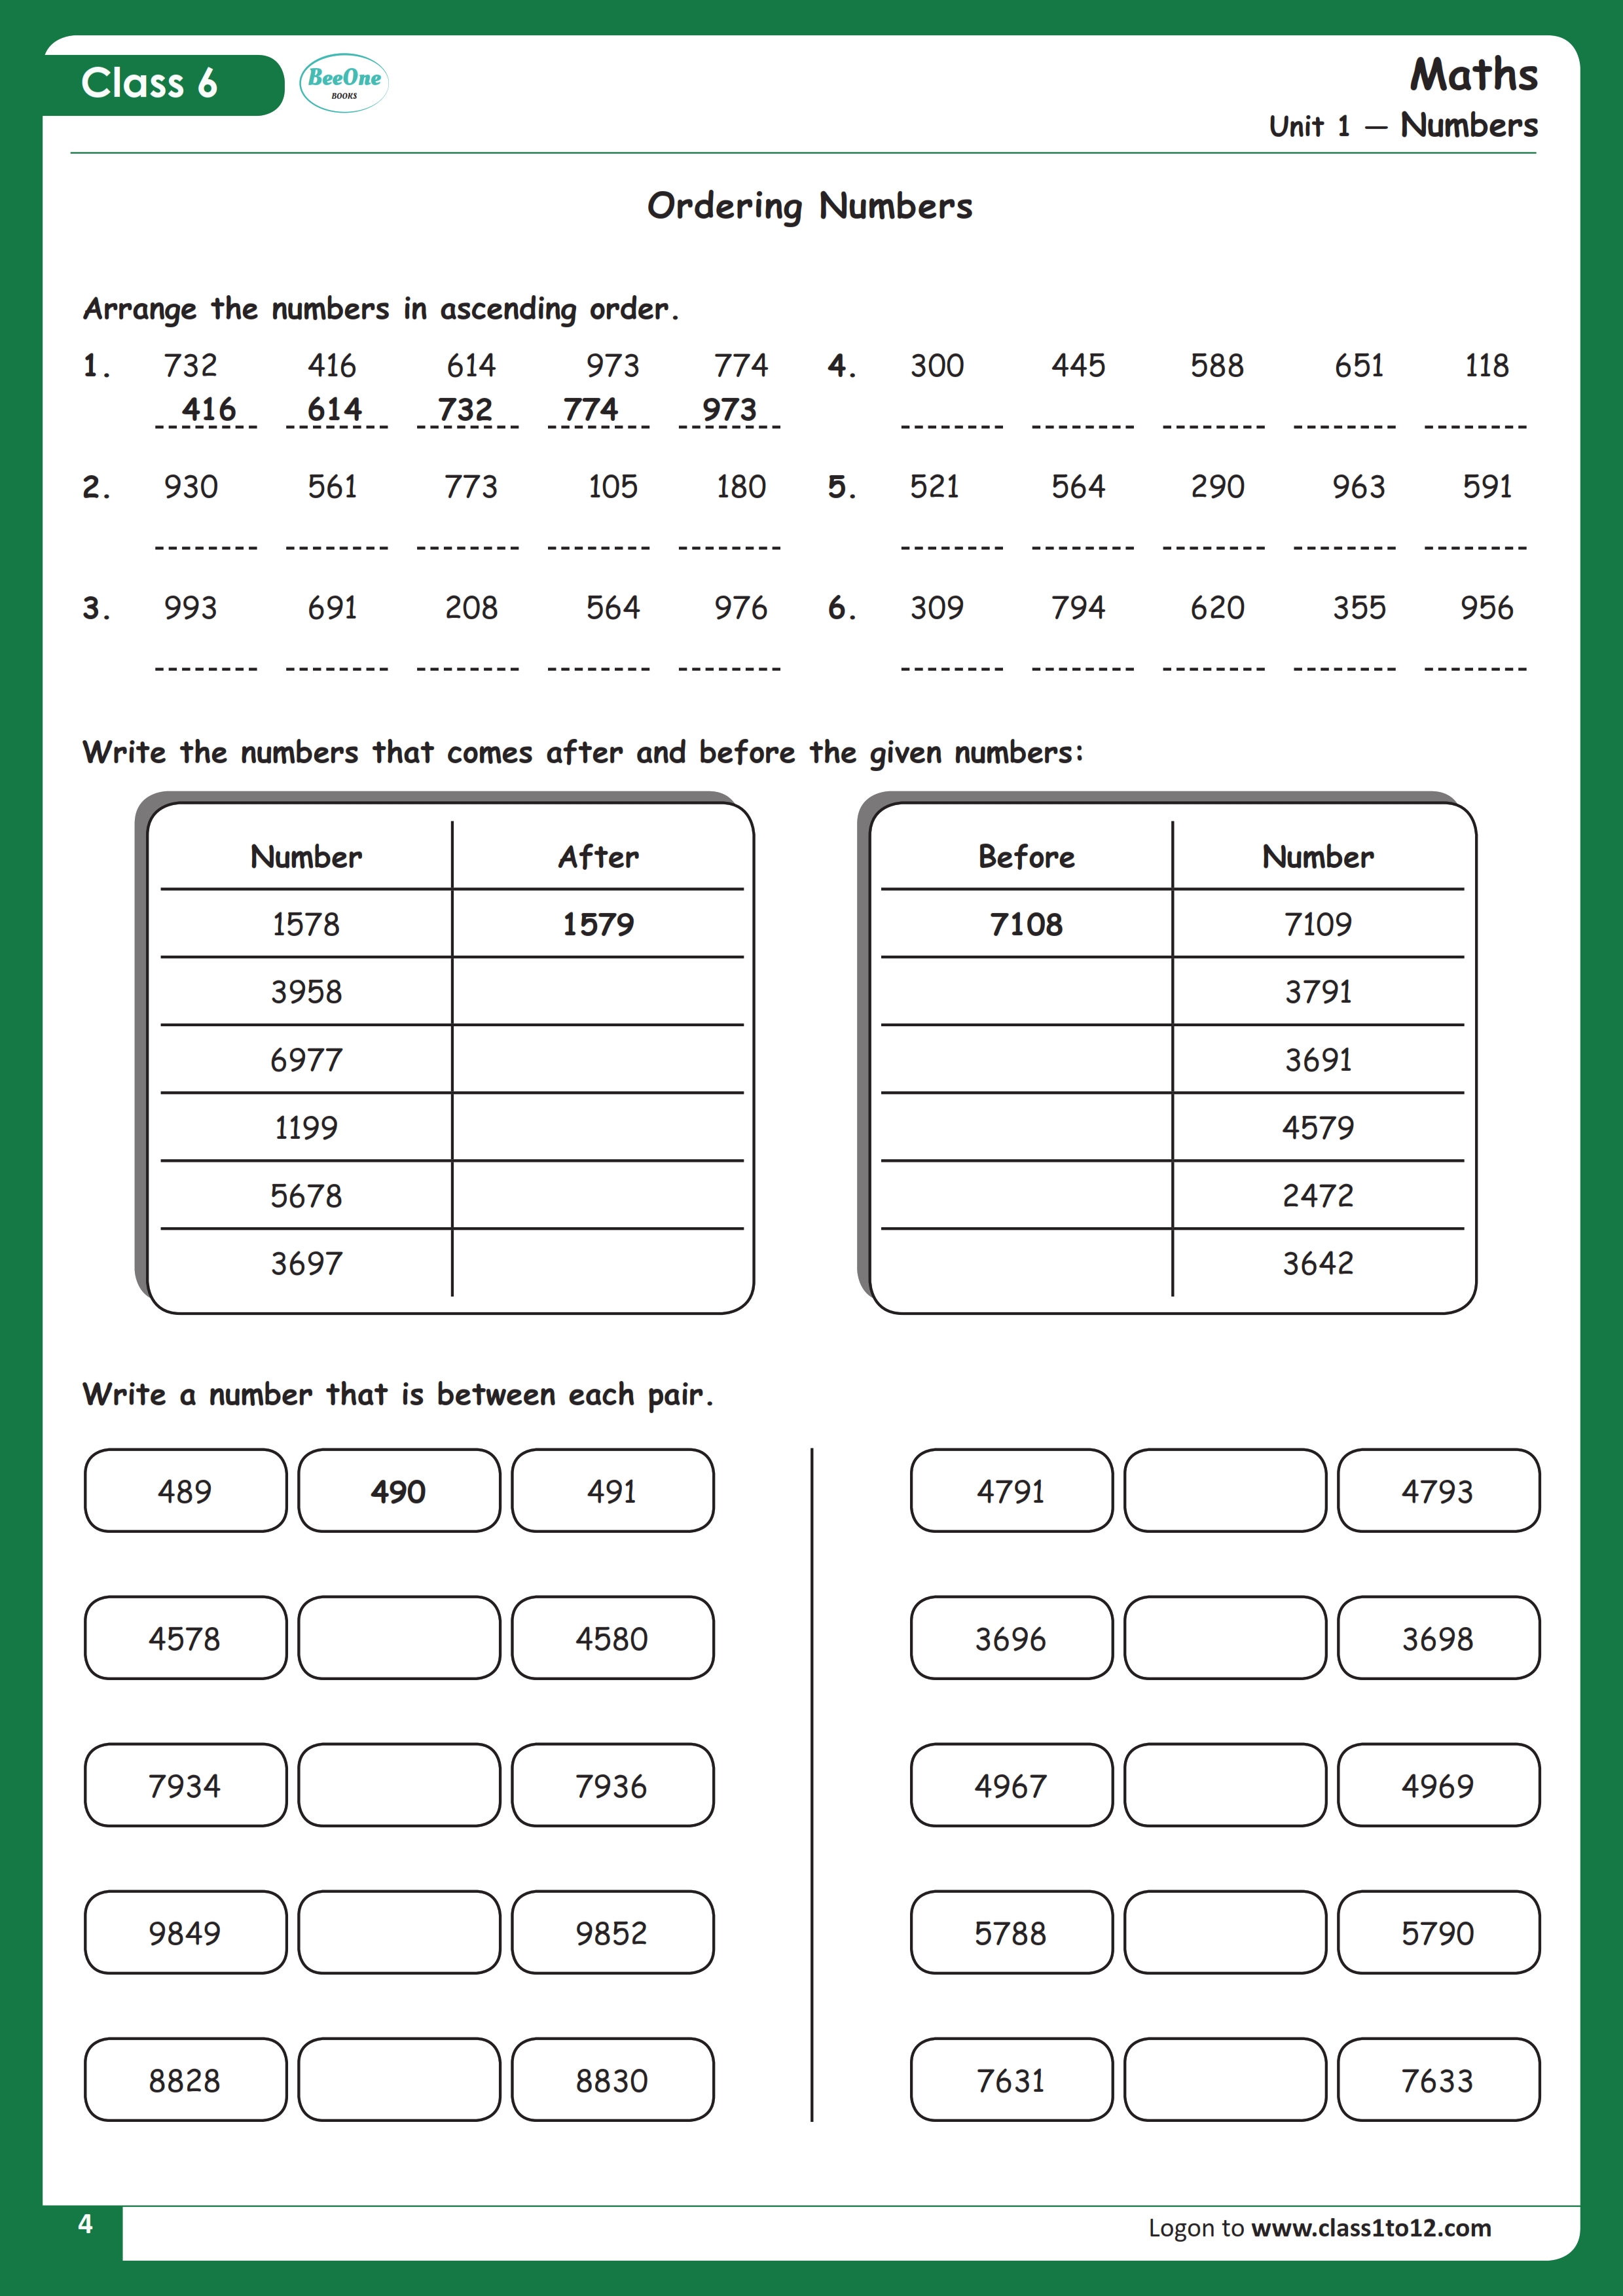 CBSE Class 6 Maths Knowing Our Numbers Worksheet Class1to12